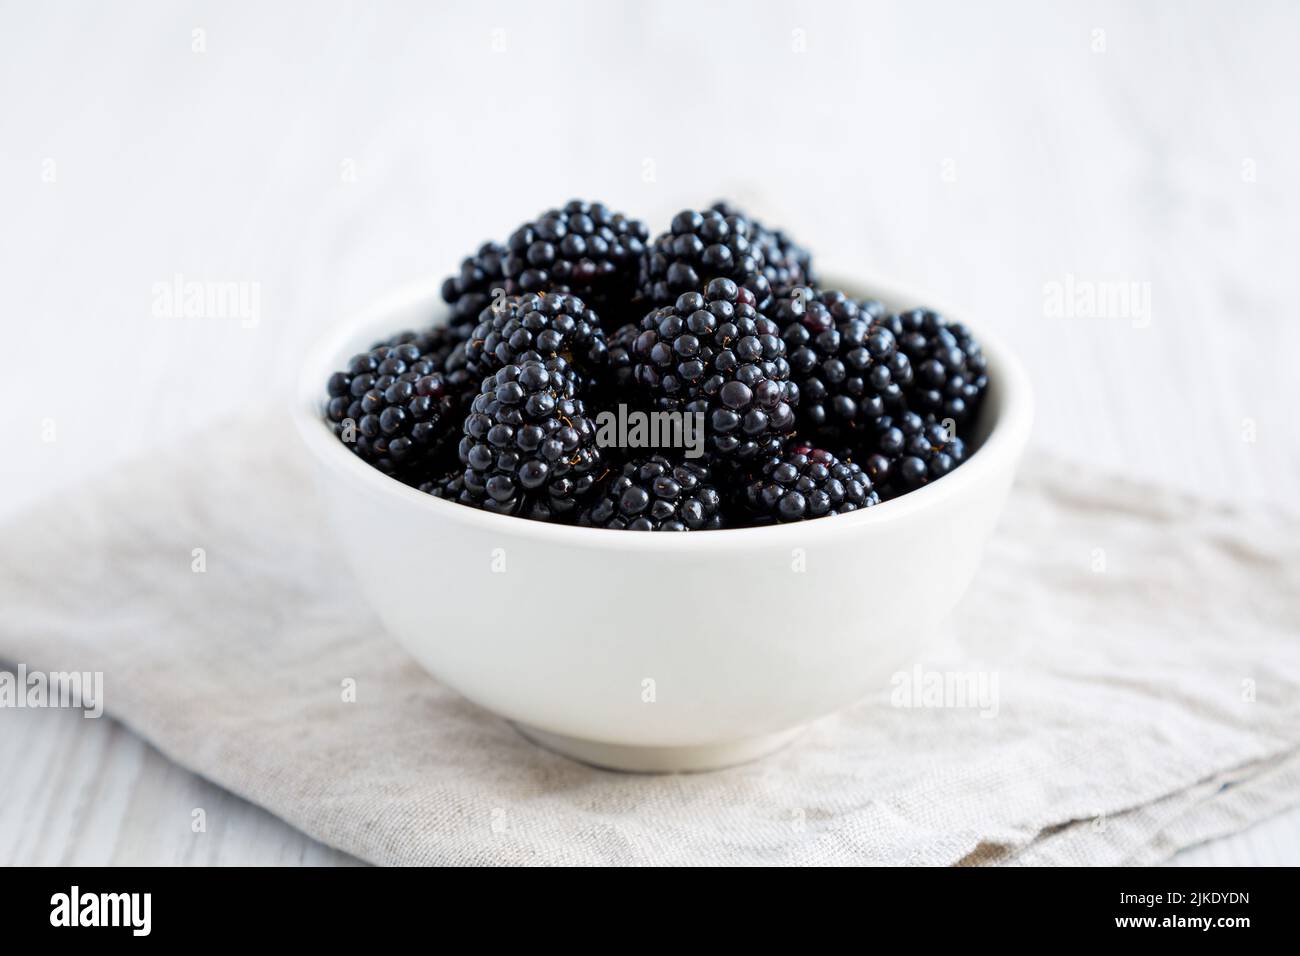 Raw Blackberries in a Bowl, side view. Stock Photo